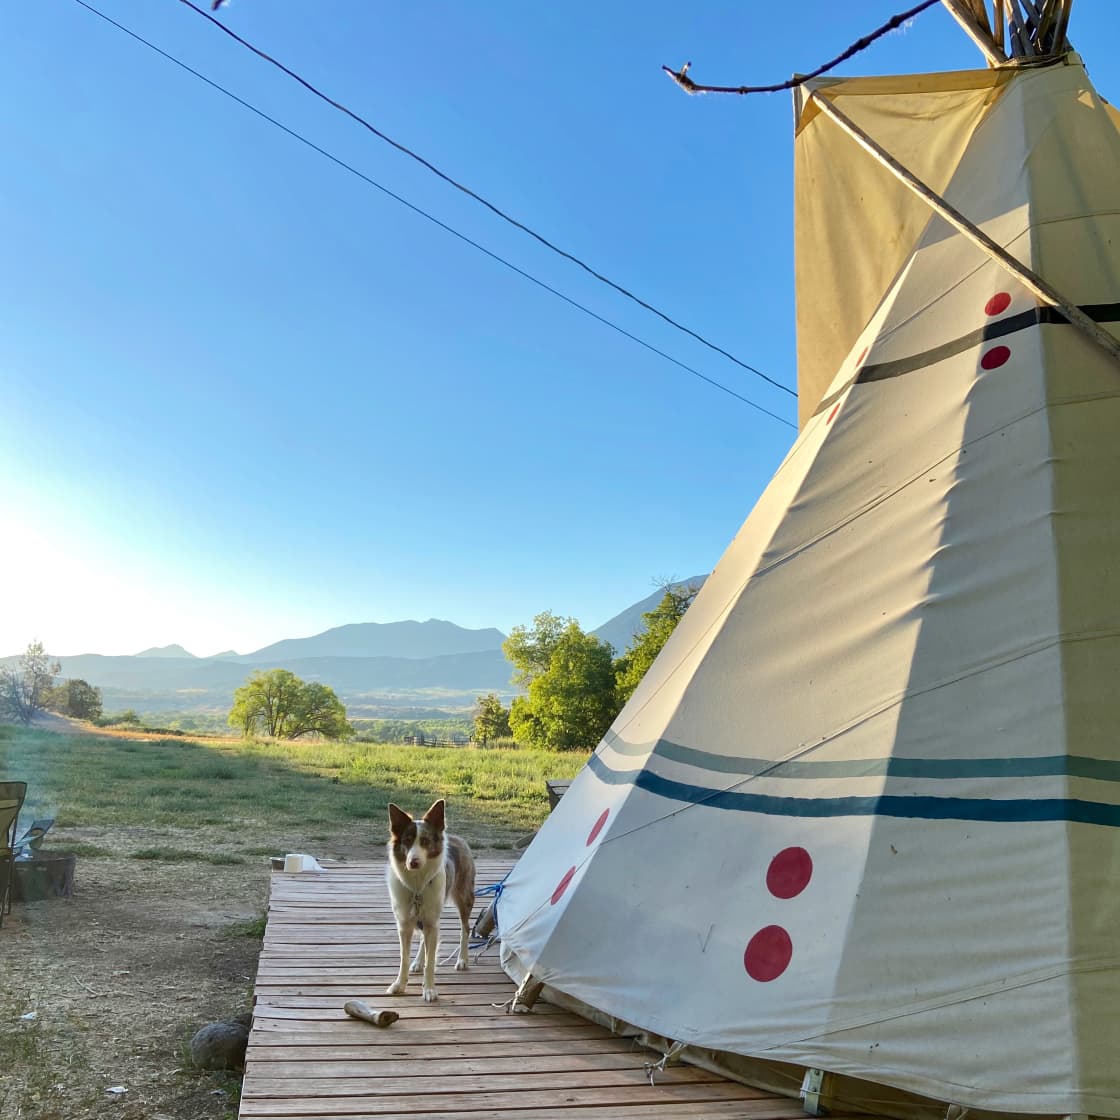 We loved the tipi life!